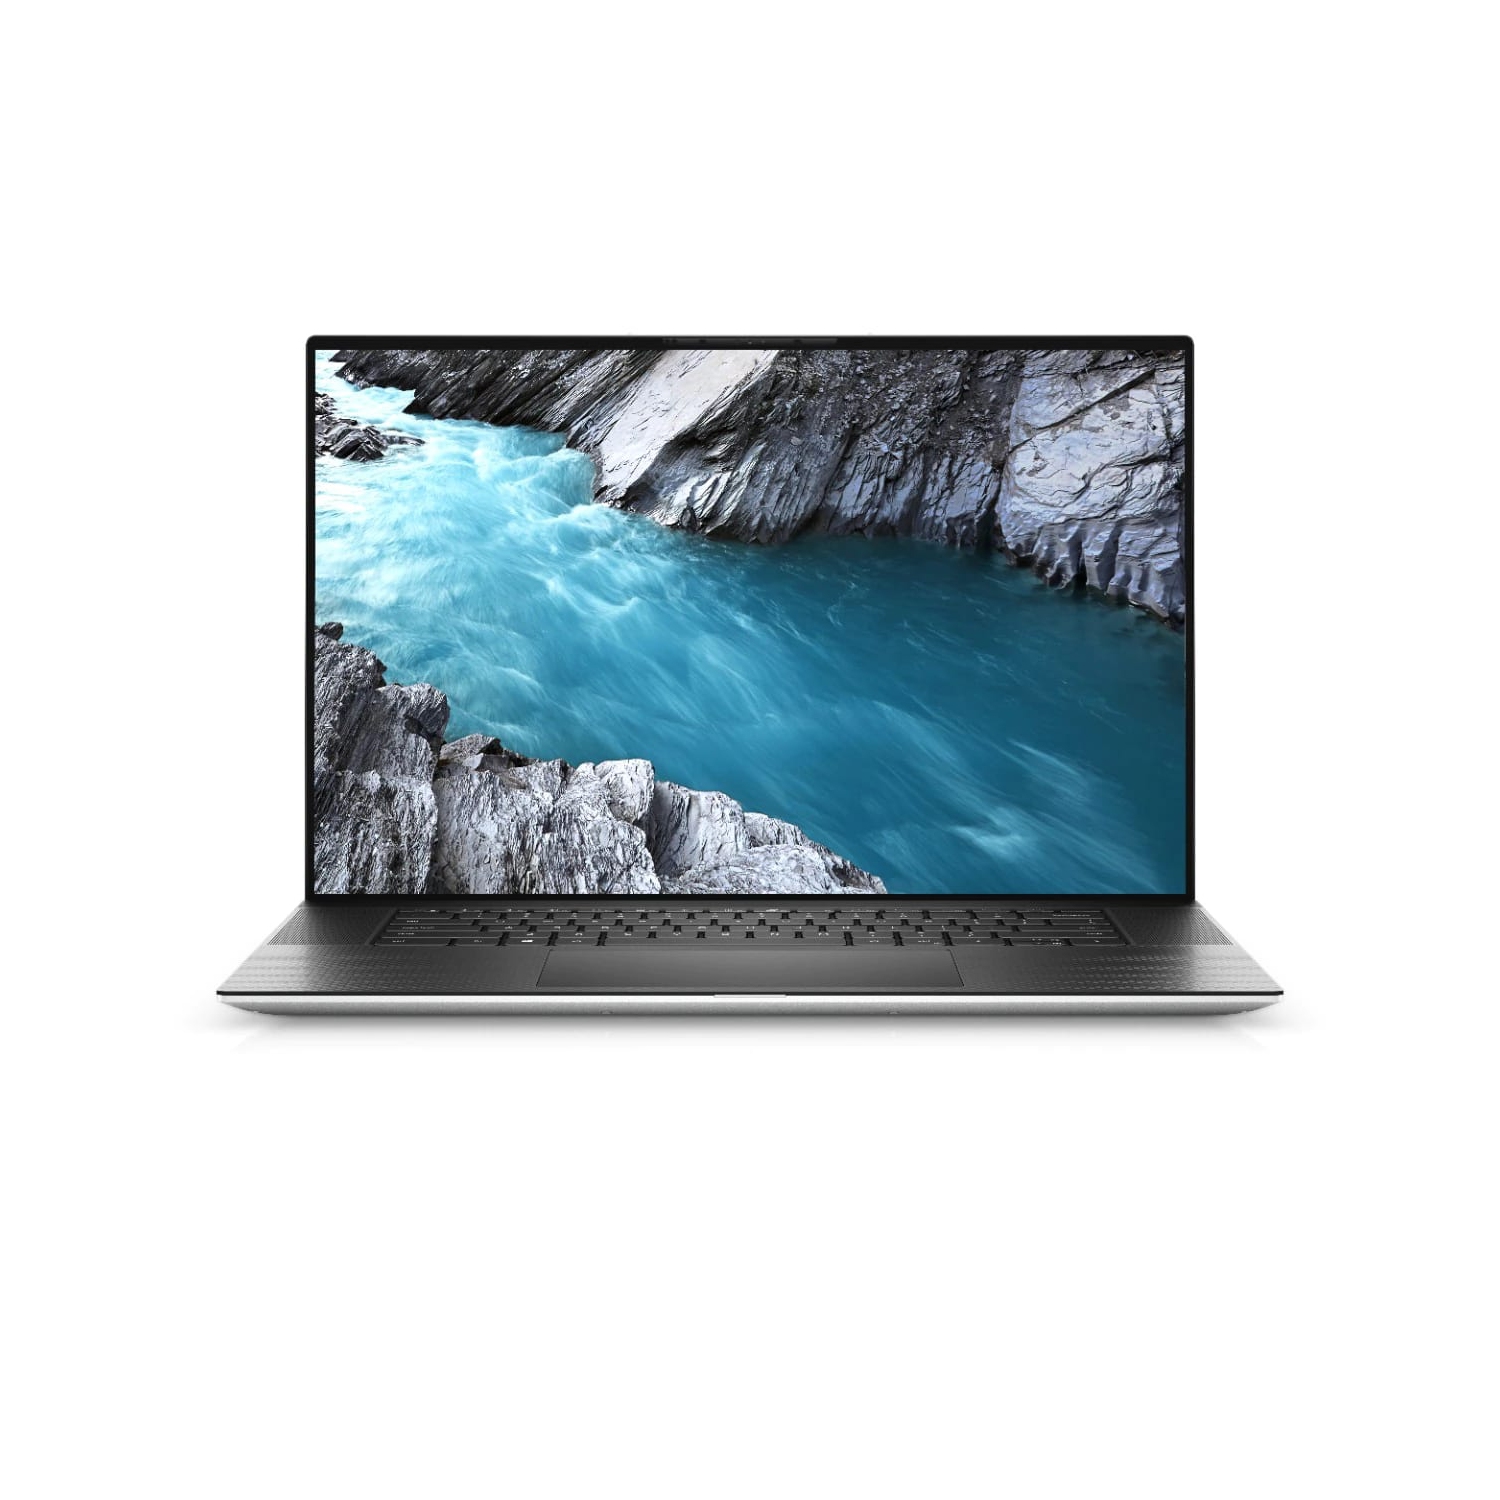 Refurbished (Excellent) - Dell XPS 17 9700 Laptop (2020), 17" 4K Touch, Core i9 - 512GB SSD - 16GB RAM - RTX 2060, 8 Cores @ 5.3 GHz - 10th Gen CPU Certified Refurbished